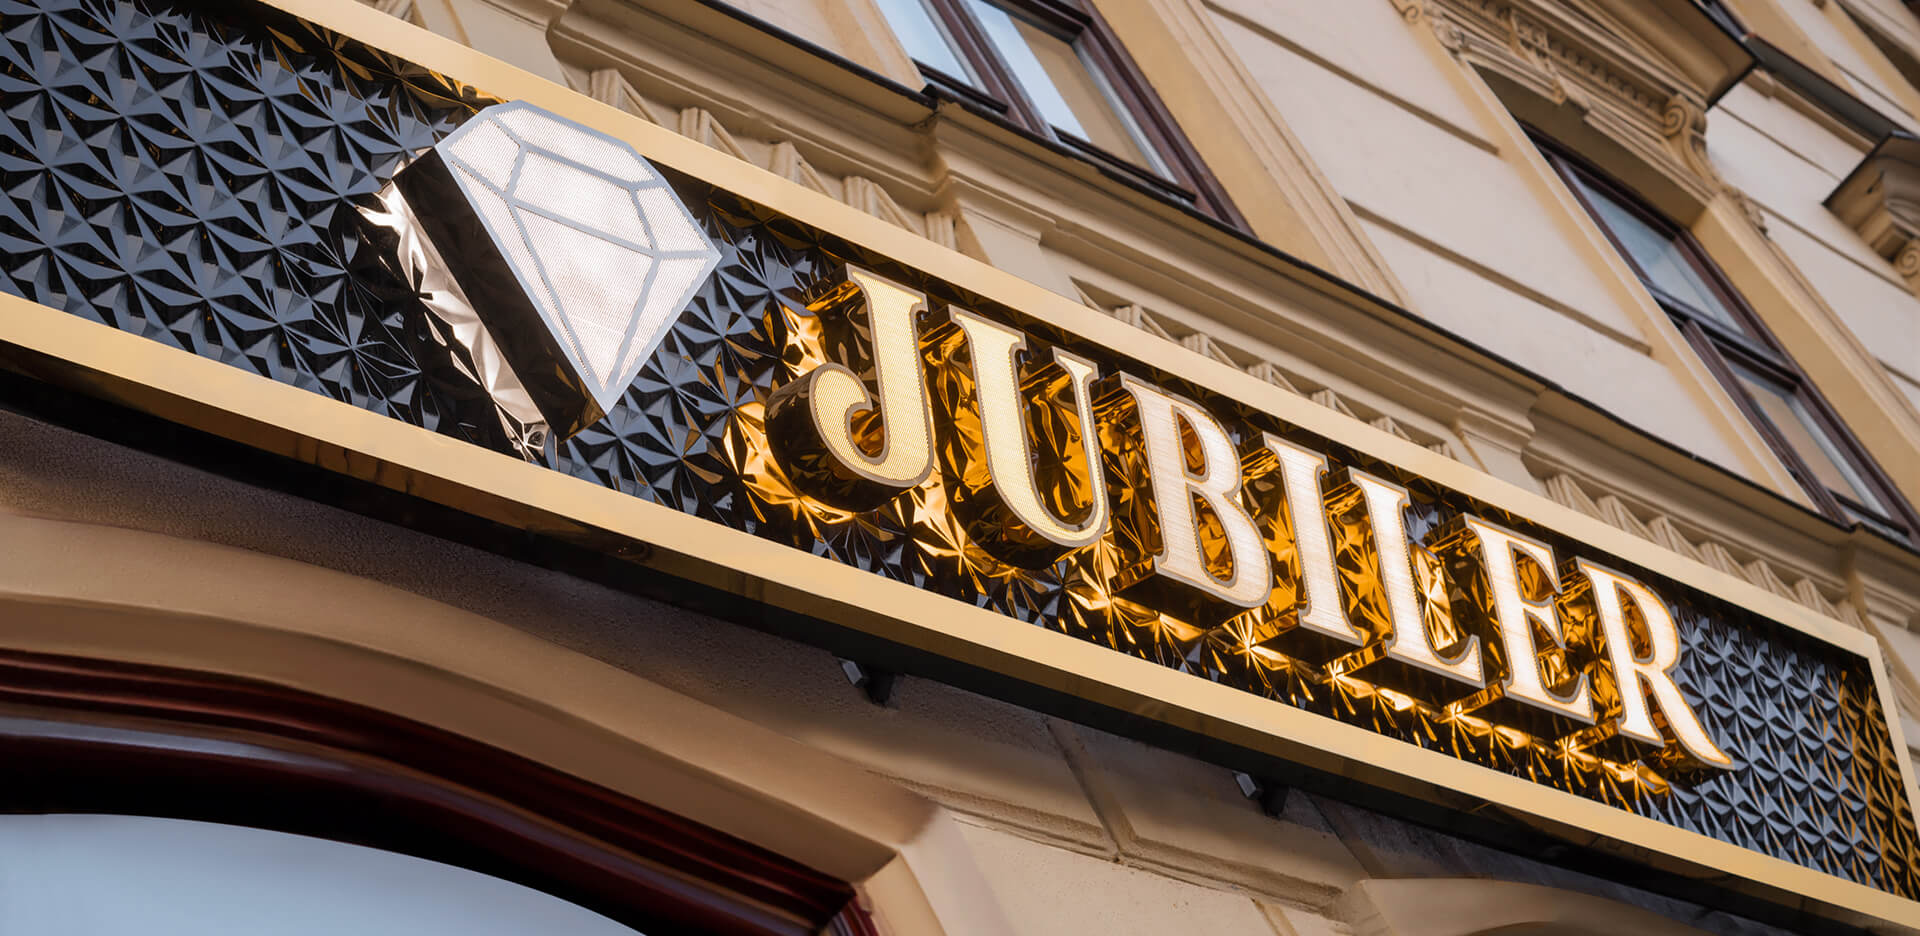 Jeweler - Signboard for the Jeweler, made of perforated stainless steel in gold with logo